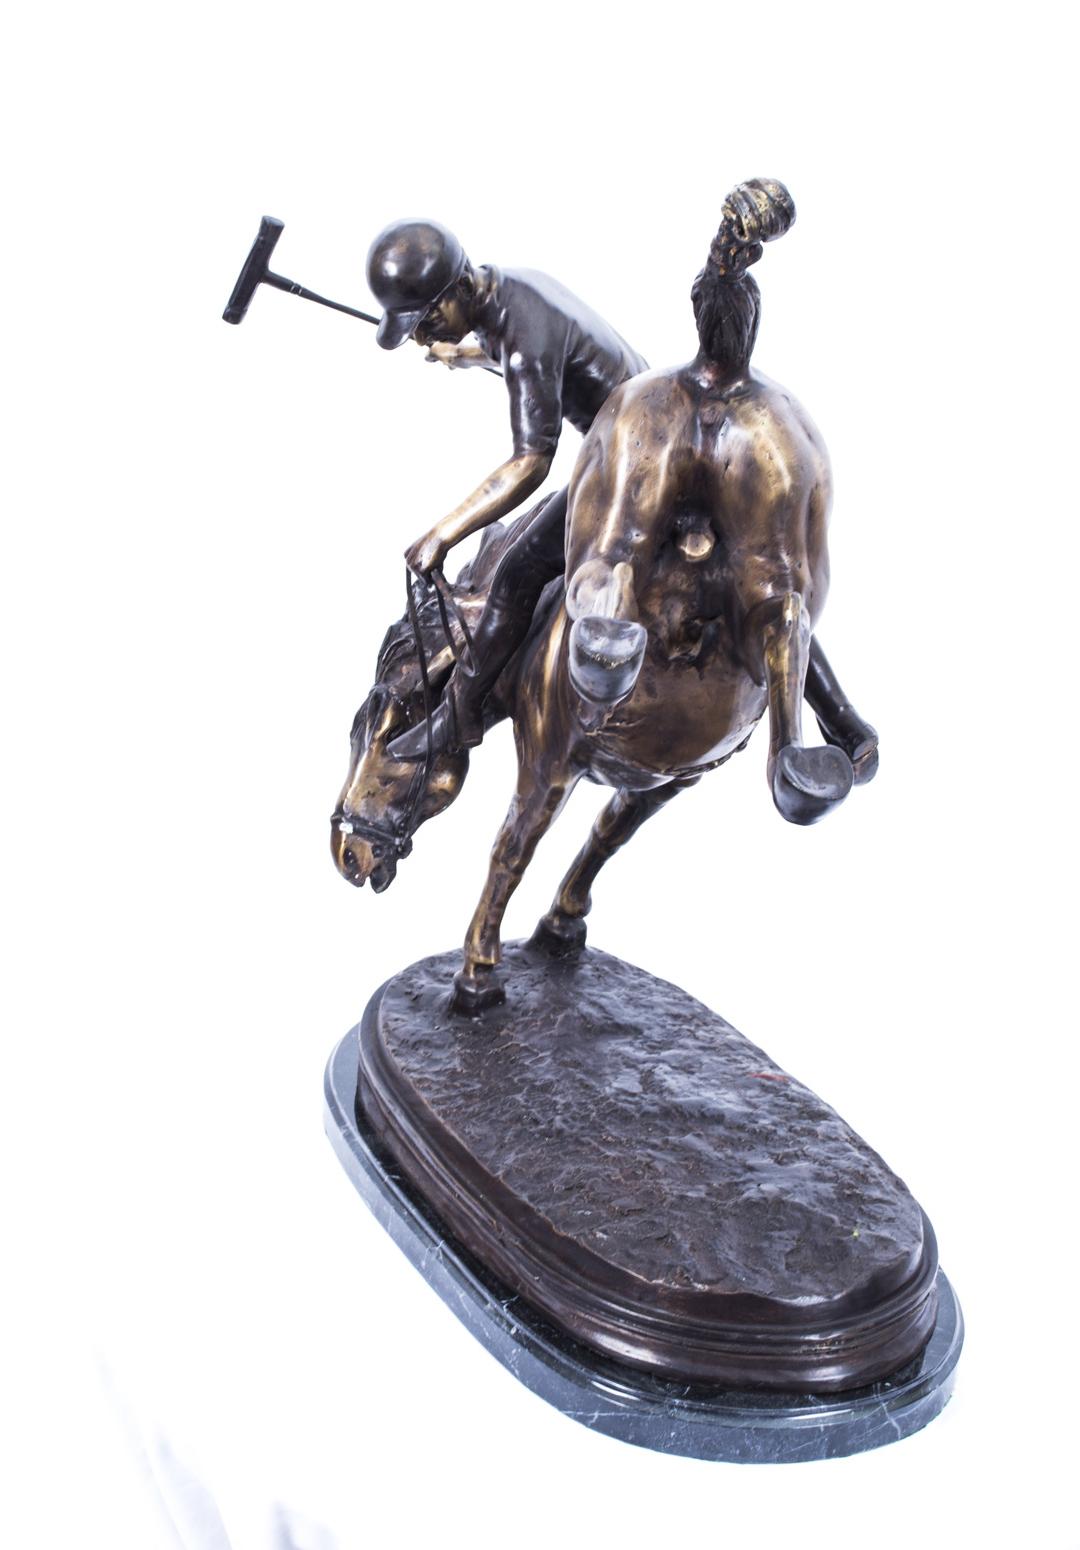 Vintage Bronze Polo Player Bucking a Horse Sculpture, 20th Century For Sale 2